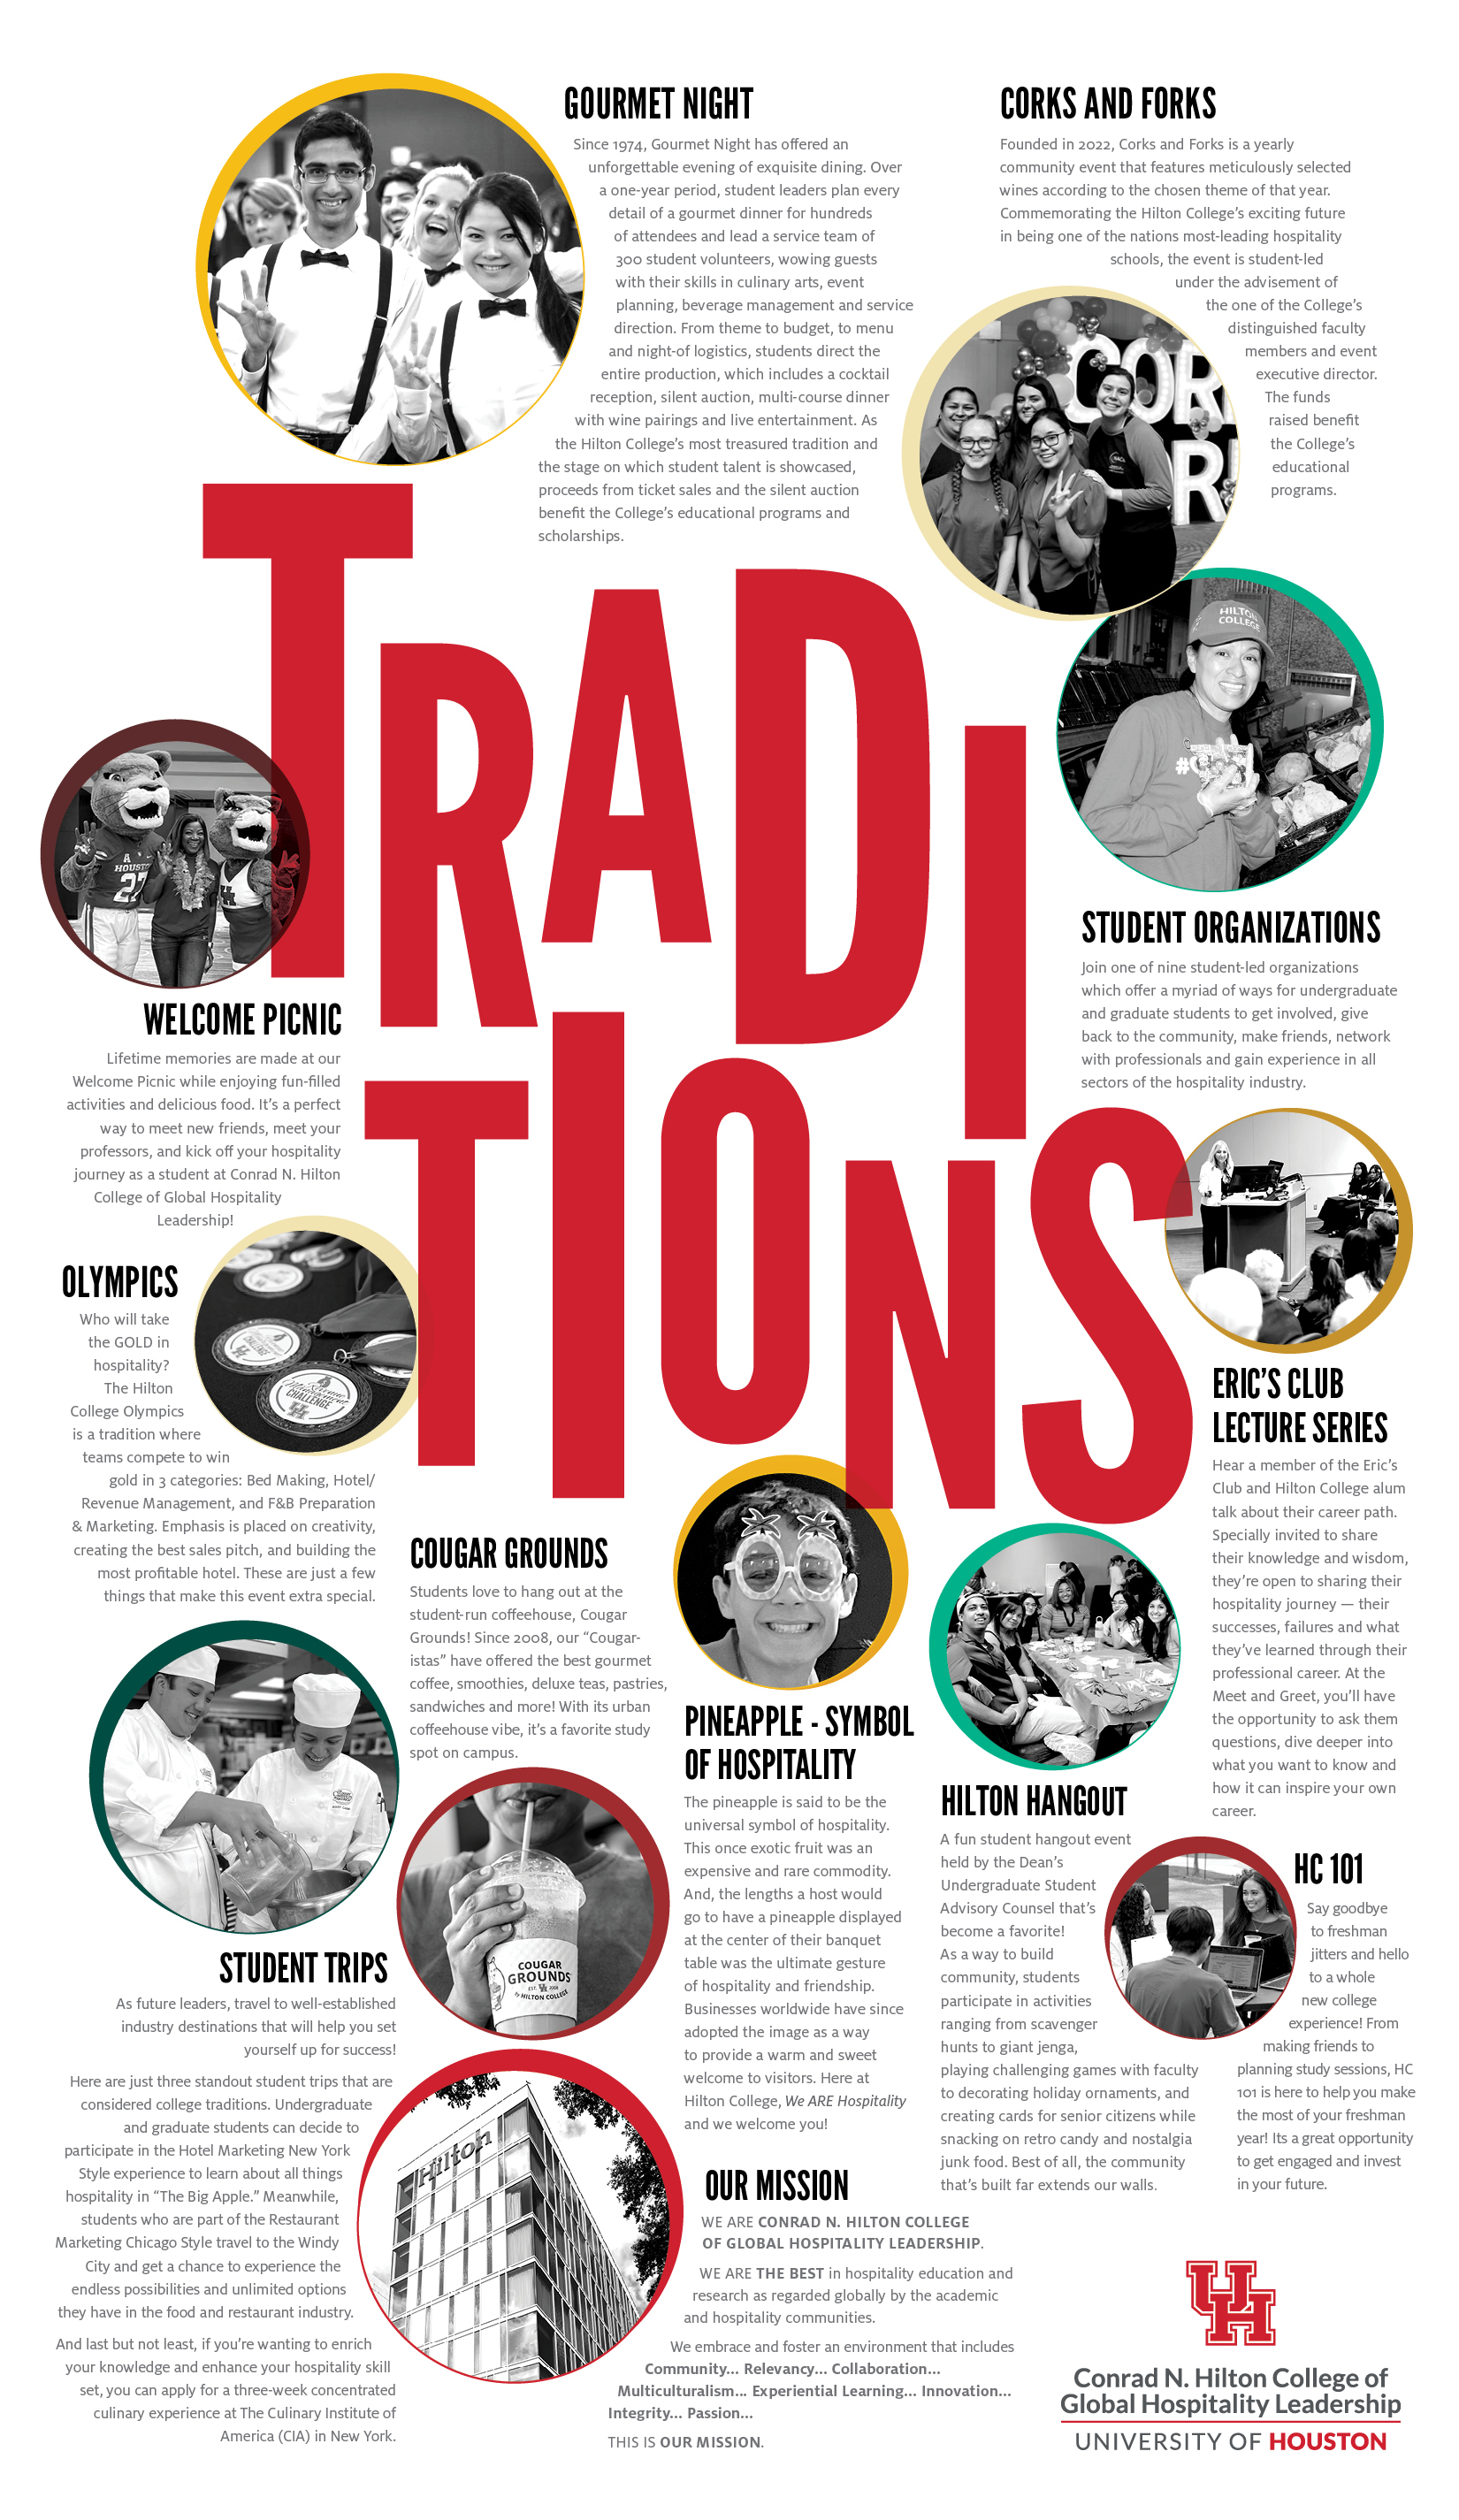 final-traditions-poster-11x19.jpg